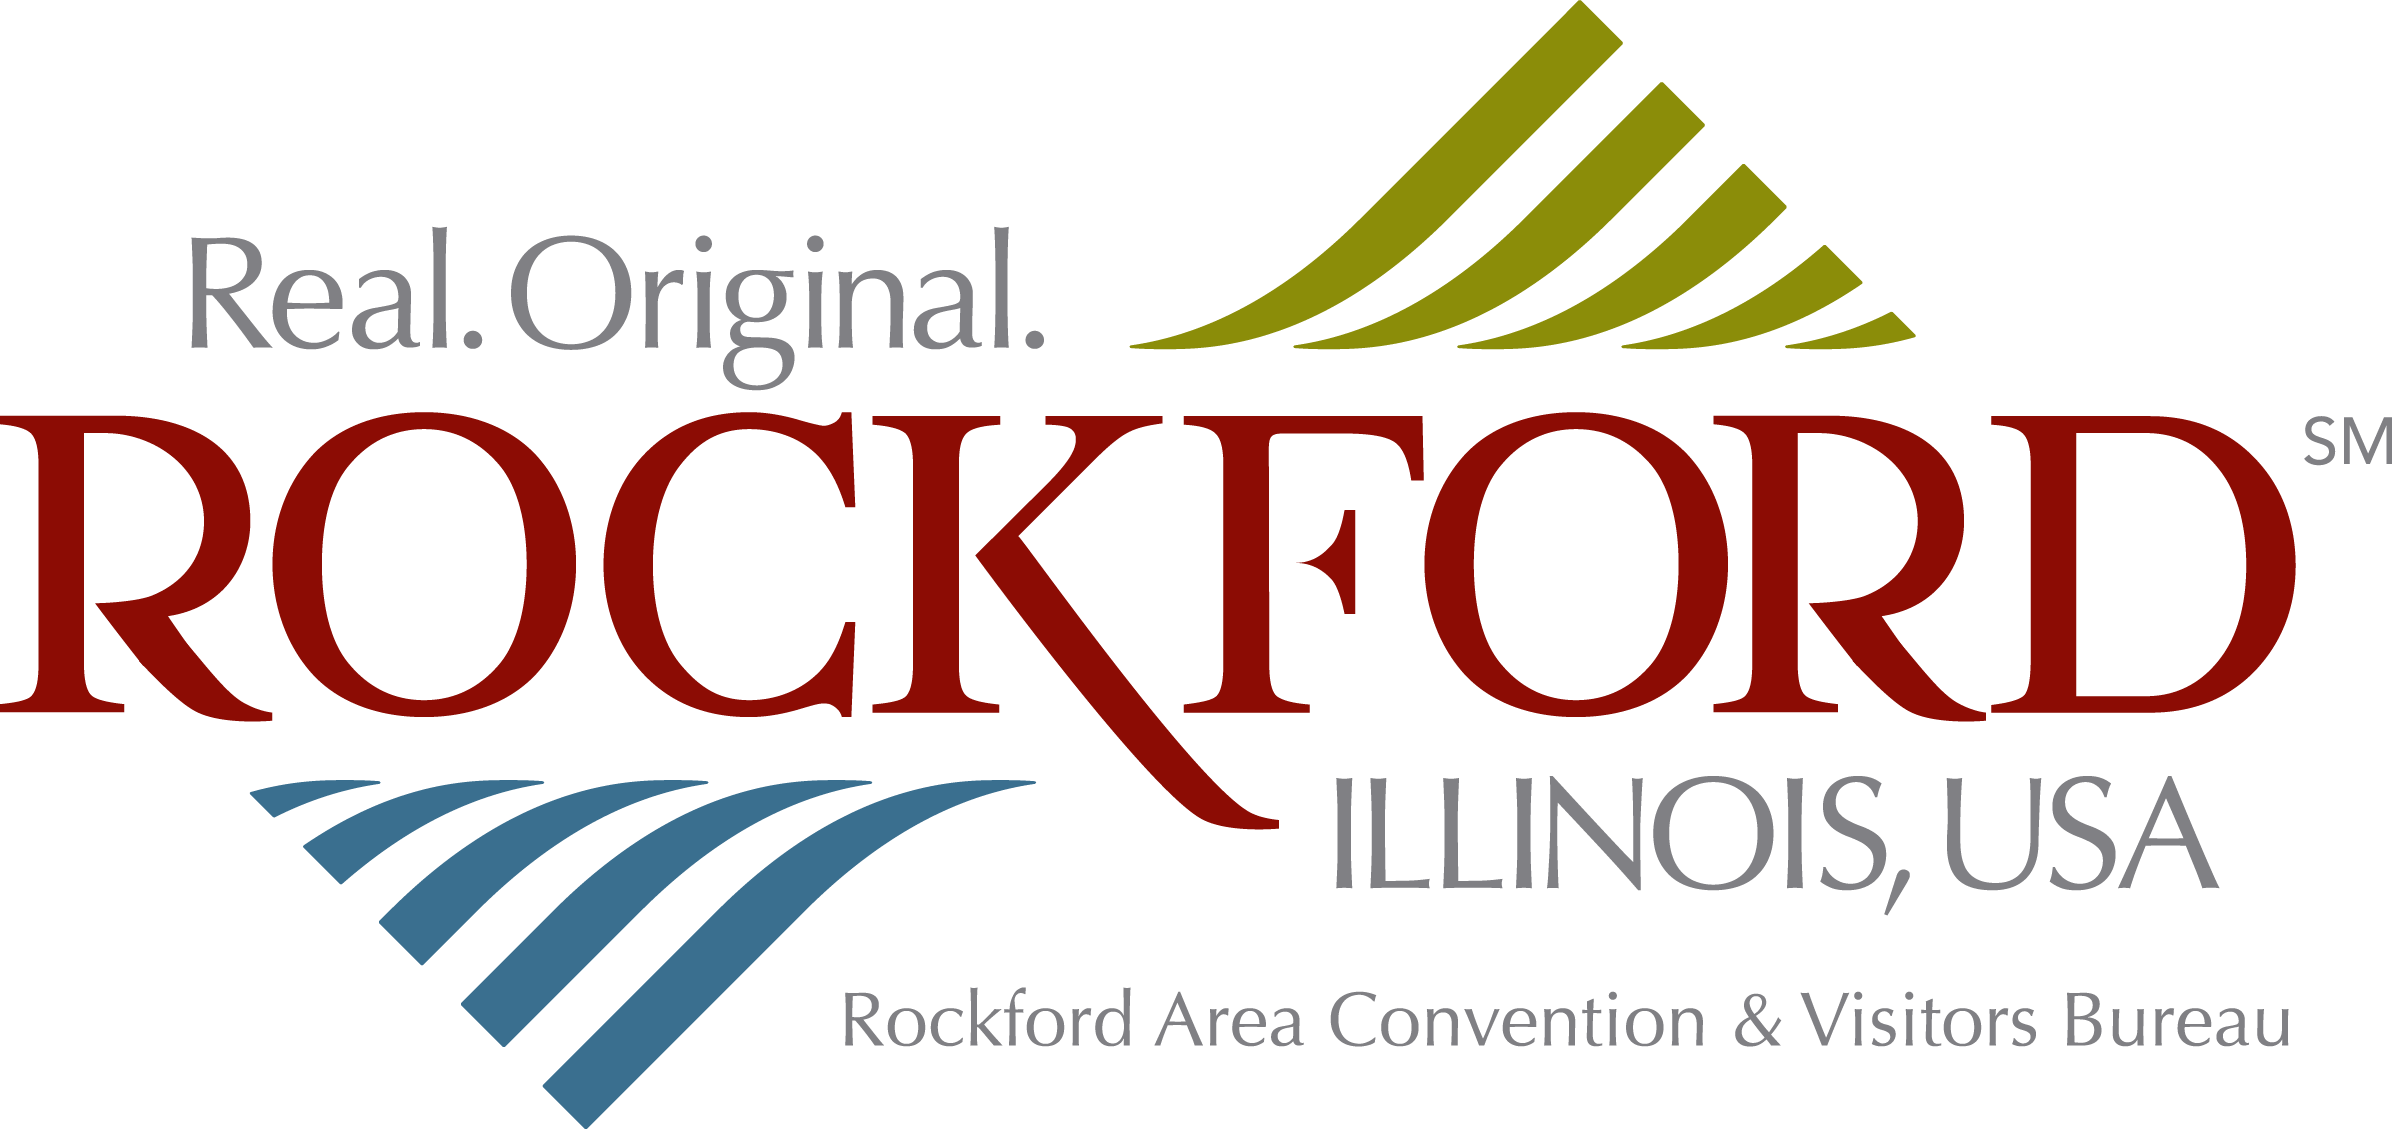 Become a Rockford Insider